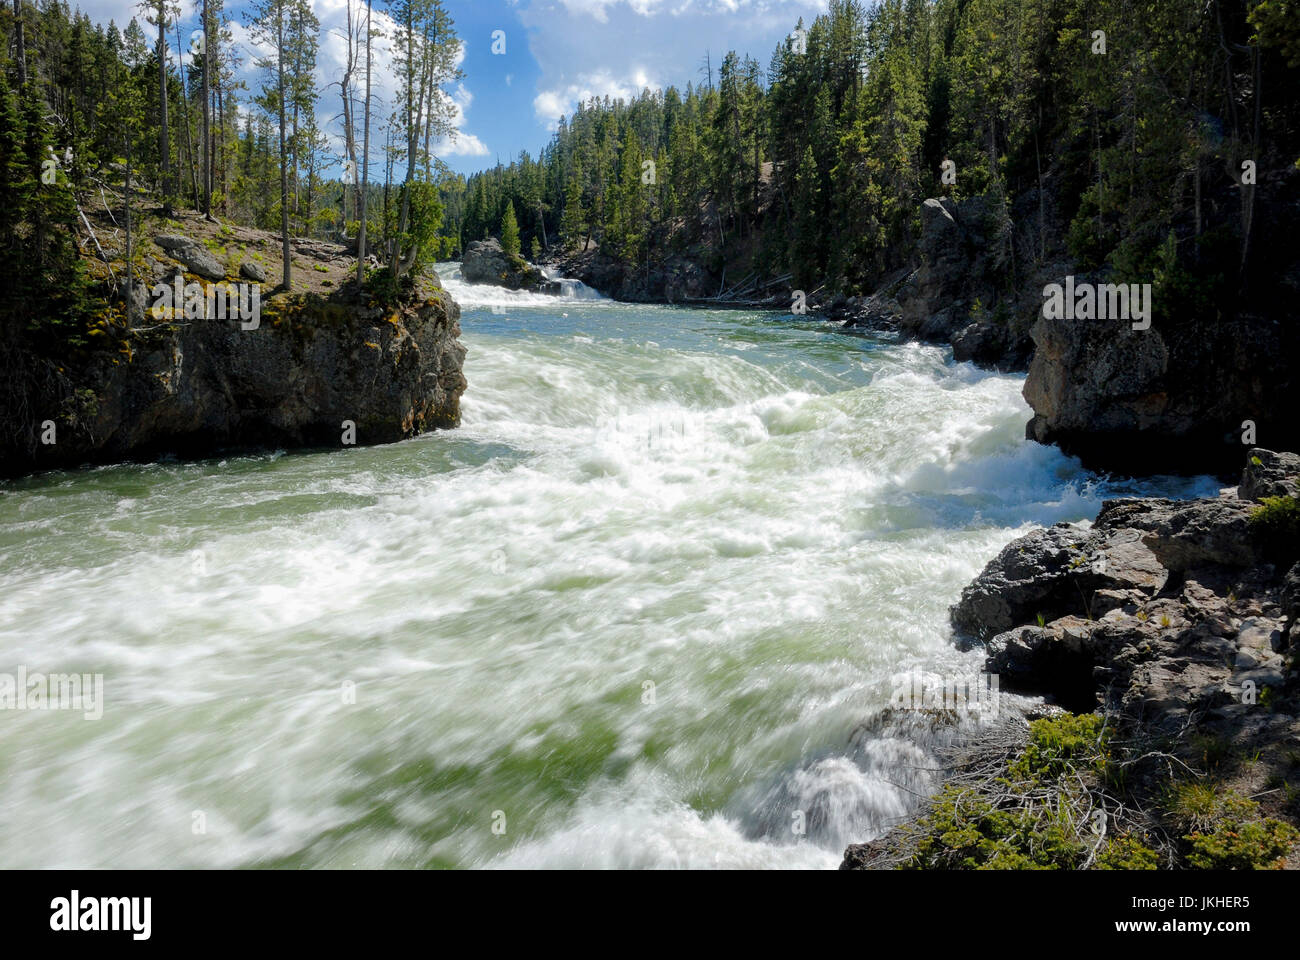 Top of the upper falls of the grand canyon of the yellowstone river, Yellowstone Naitonal Park, Wyoming, USA Stock Photo